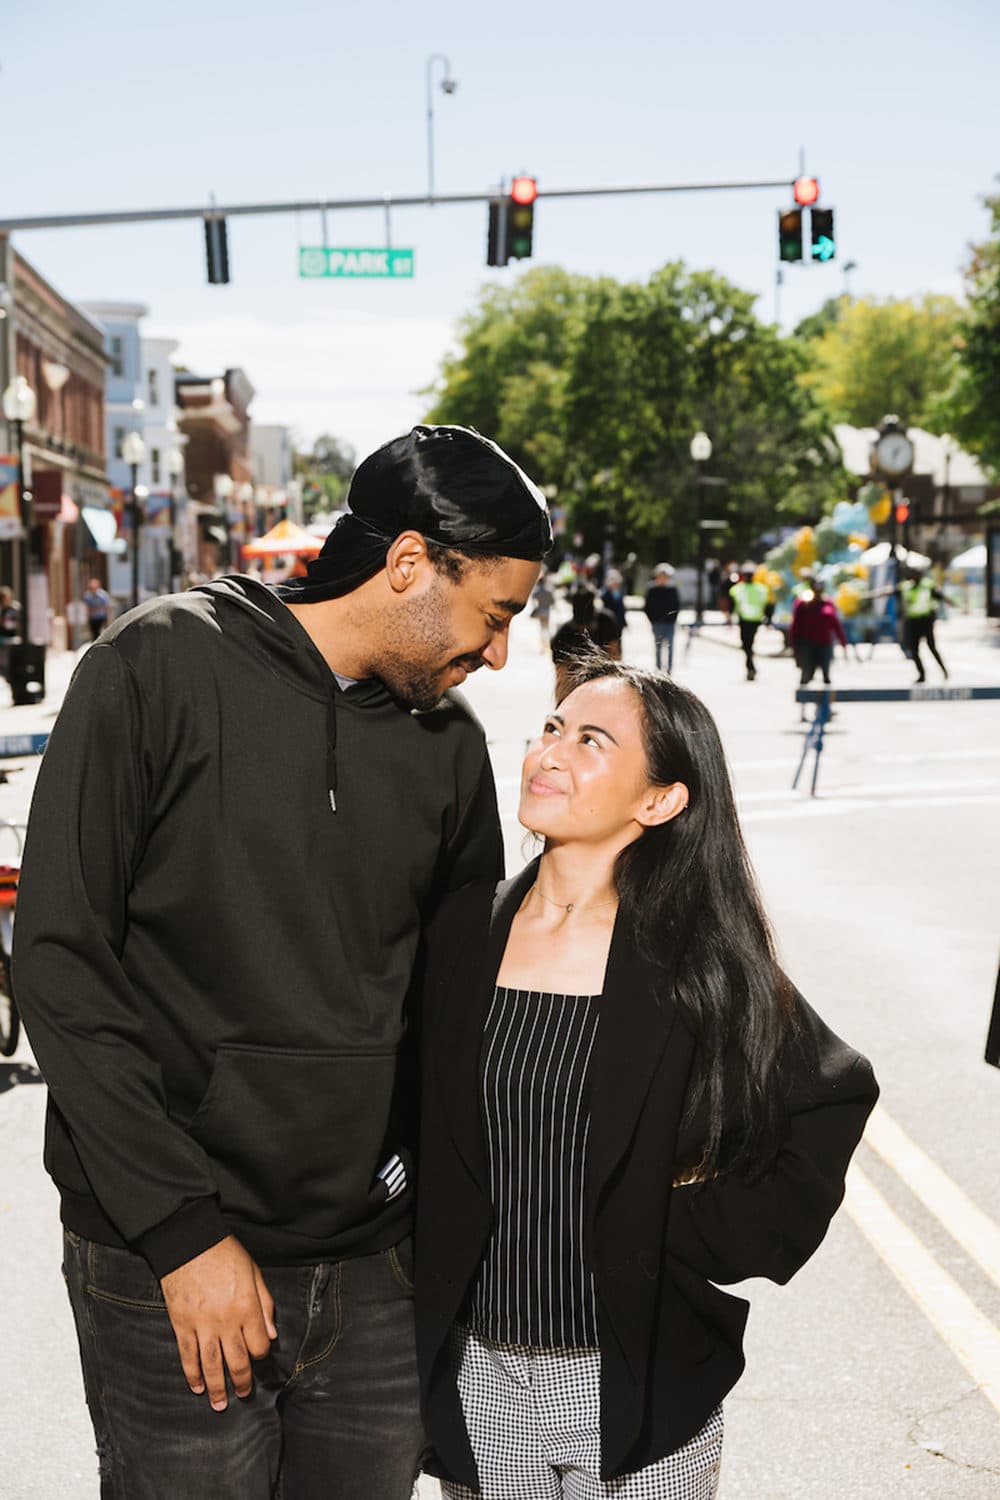 Tashawn Taylor and Hanna Enoy pose outside the Boston Public Library Field's Corner branch on Sept. 24 as part of the &quot;Beautiful Dot&quot; project. (Courtesy Mike Ritter)